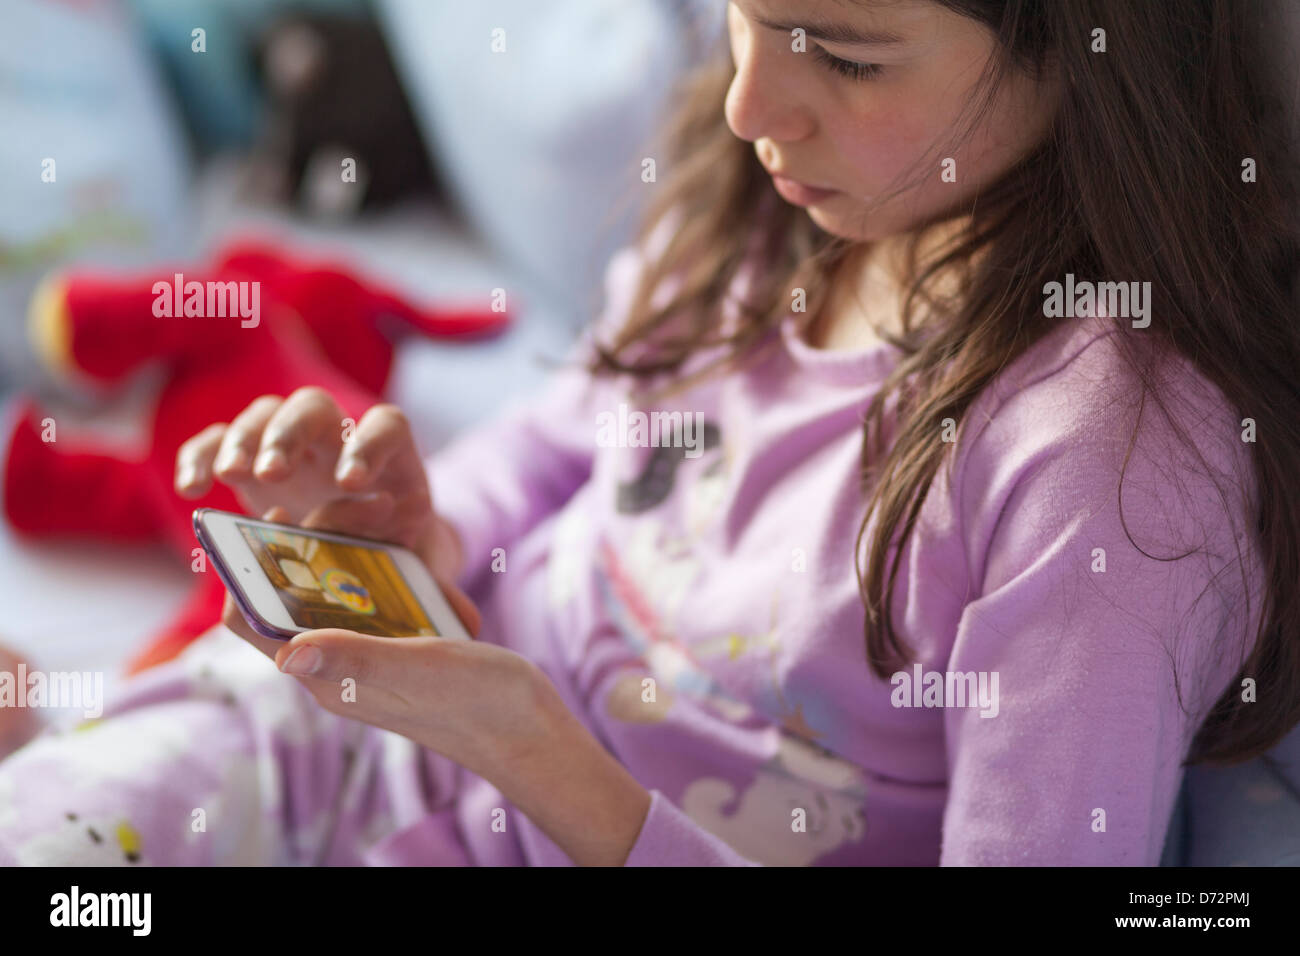 Young girl plays games on mobile device in bed Stock Photo